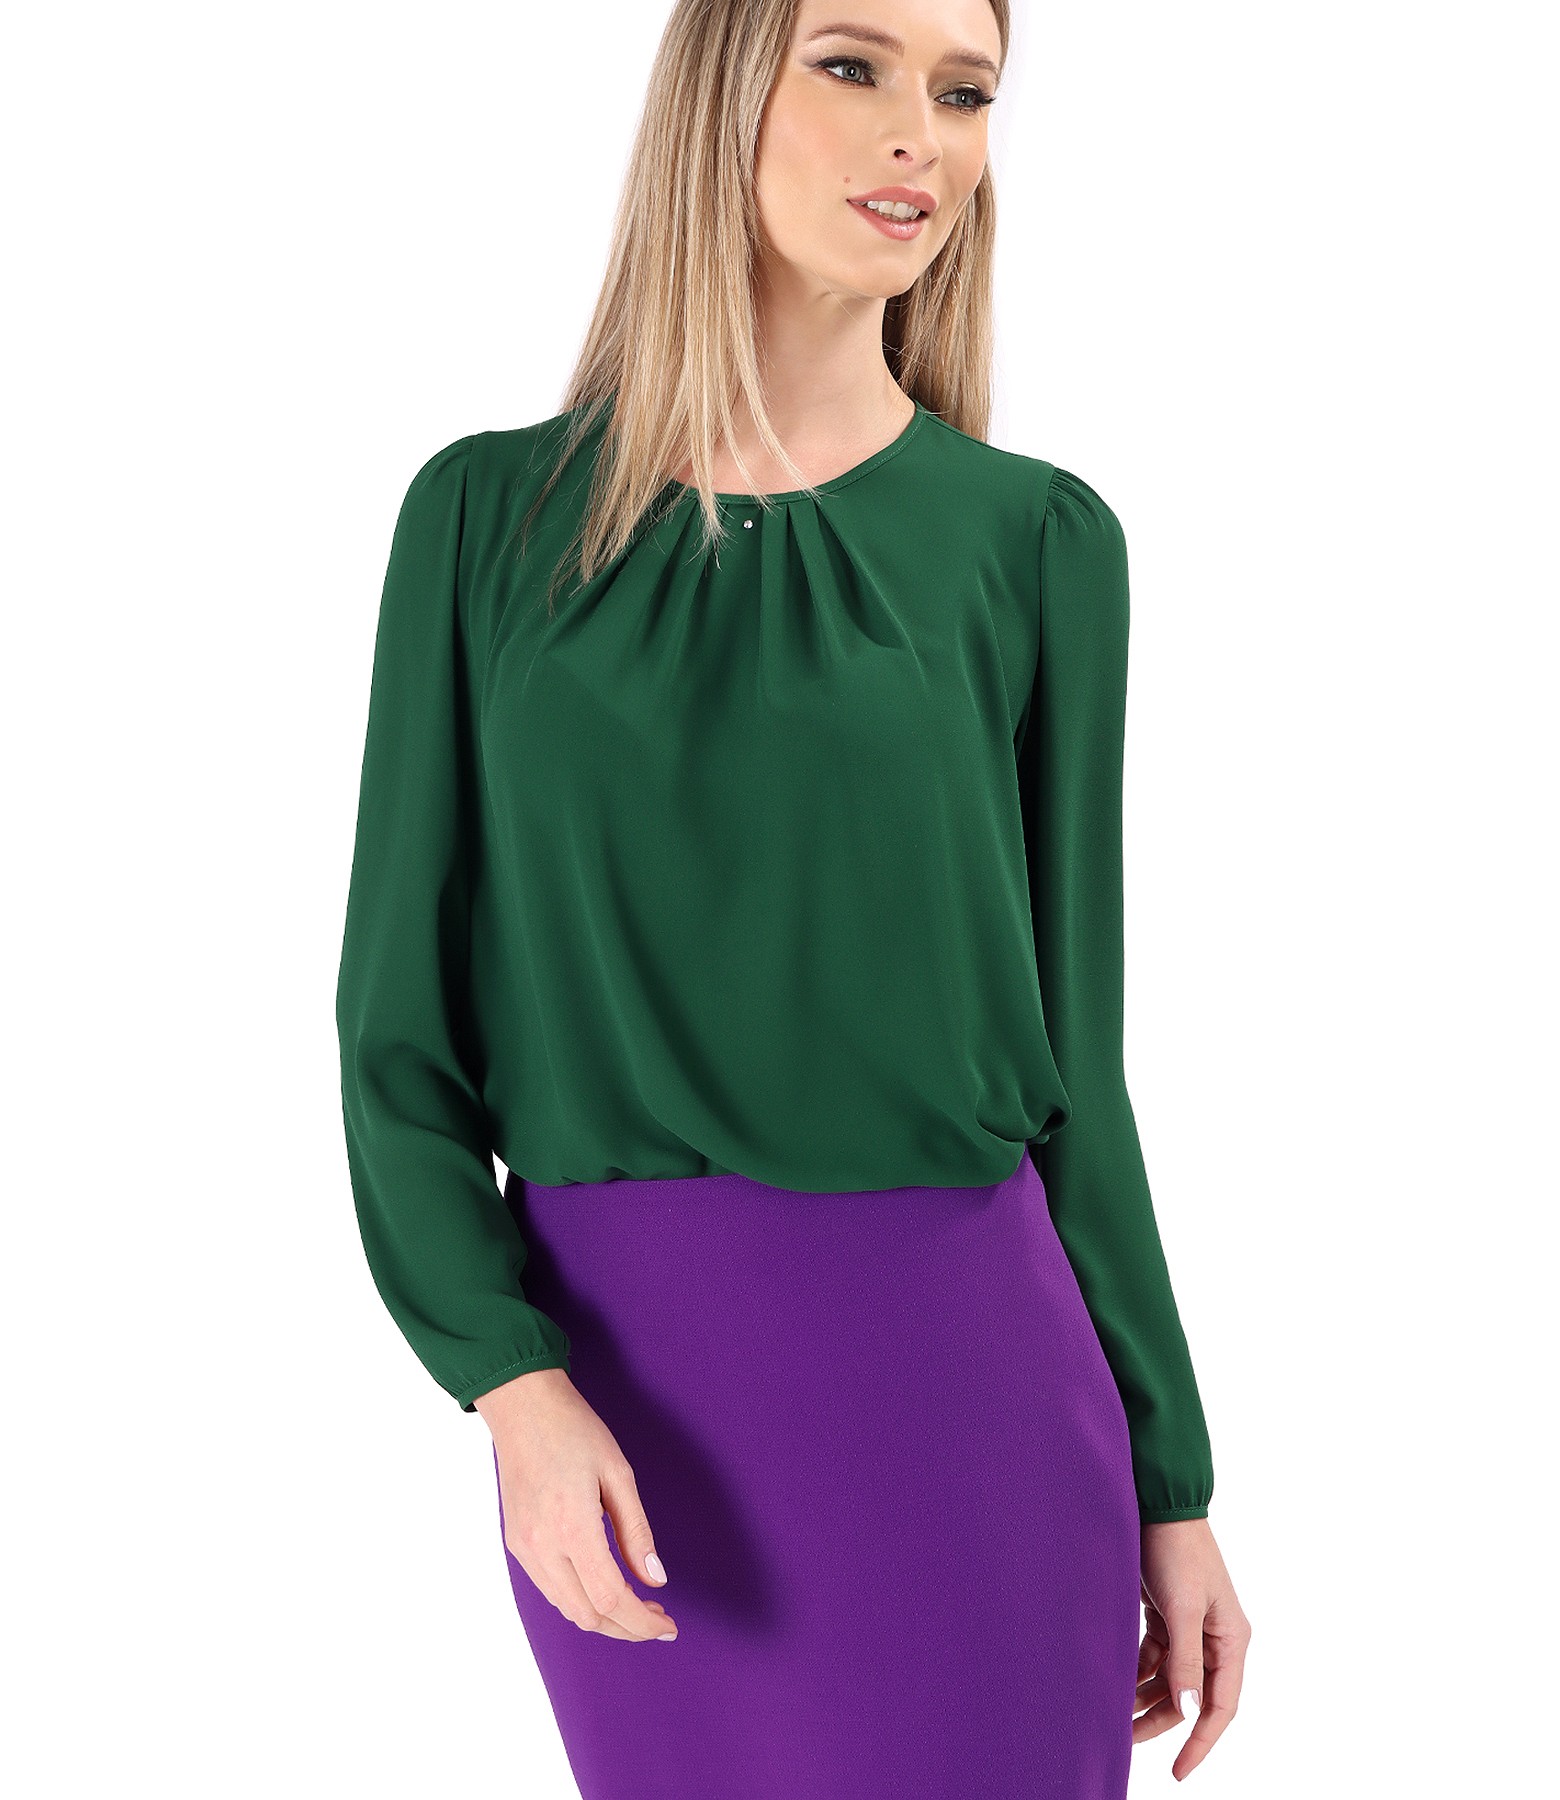 Blouse with folds on decolletage embellished with crystals green - YOKKO